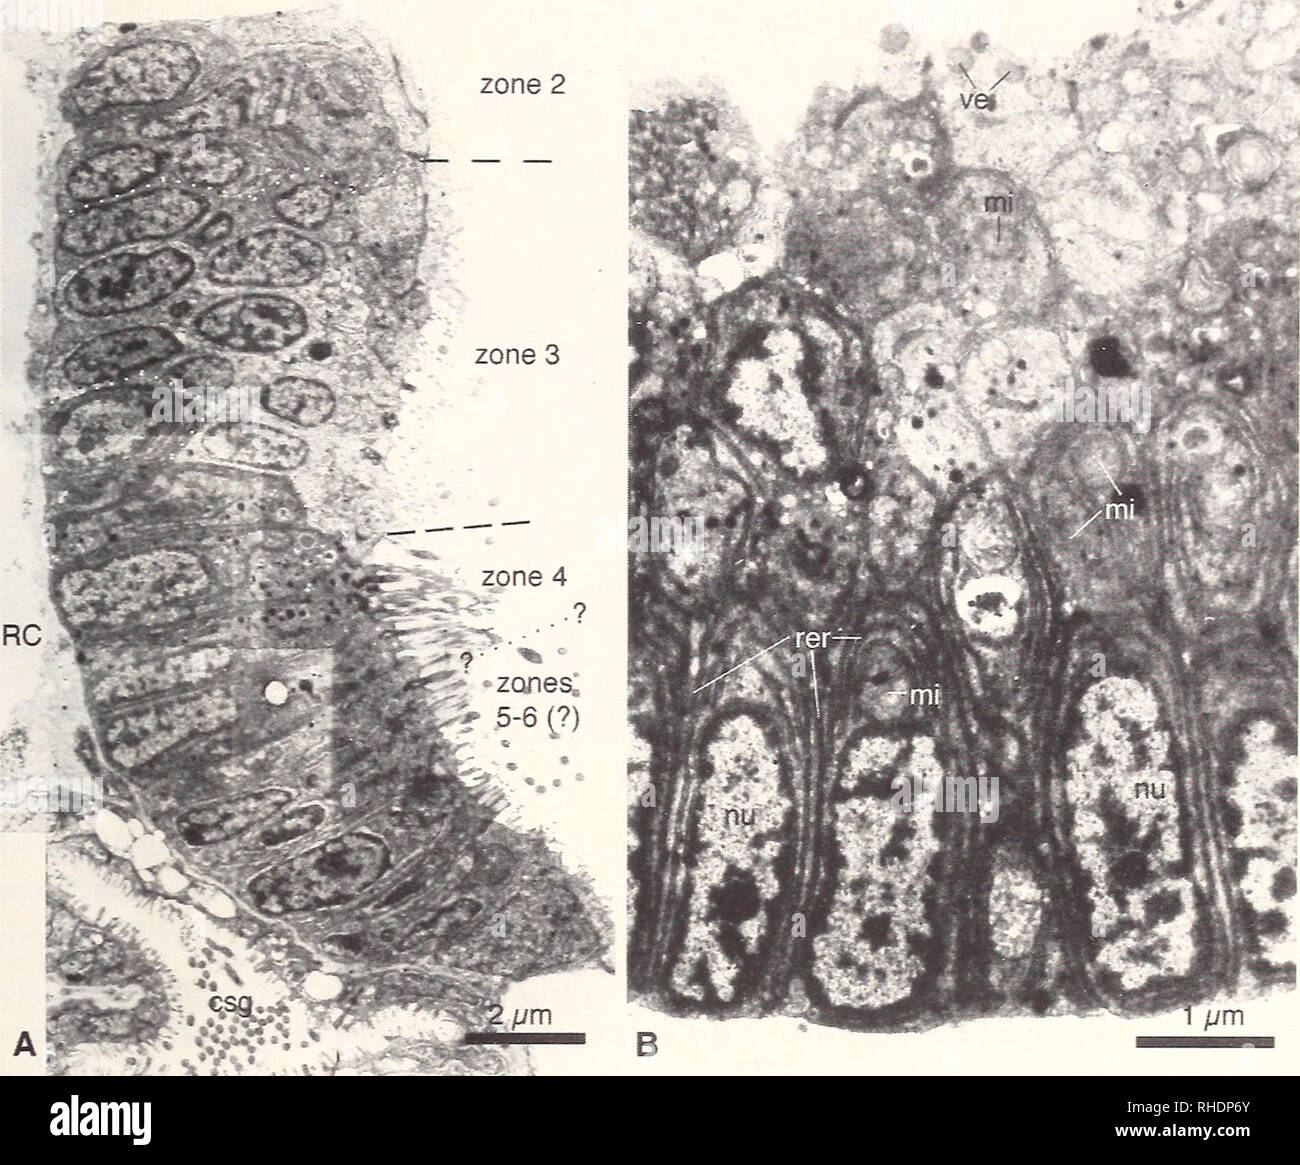 . Bonner zoologische Monographien. Zoology. 39. Fig.20: Transmission electron micrograph of the endostyle of a lara of Branchiostoma lan- ceolatum (llOh pf. 18°C). A - Low power magnification of the entire organ in cross sec- tional aspect. Note the clear zonation and the close proximity of the rostral coelomic cavi- ty. B - Higher magnification of zone 4-cells. Note the extensive profiles of endoplasmic reticulum around the nuclei, csg - club-shaped gland, mi - mitochondria, nu - nucleus, RC - rostral coelom. rer - rough endoplasmic reticulum, ve - apical vesicles; labelling of zones accordi Stock Photo